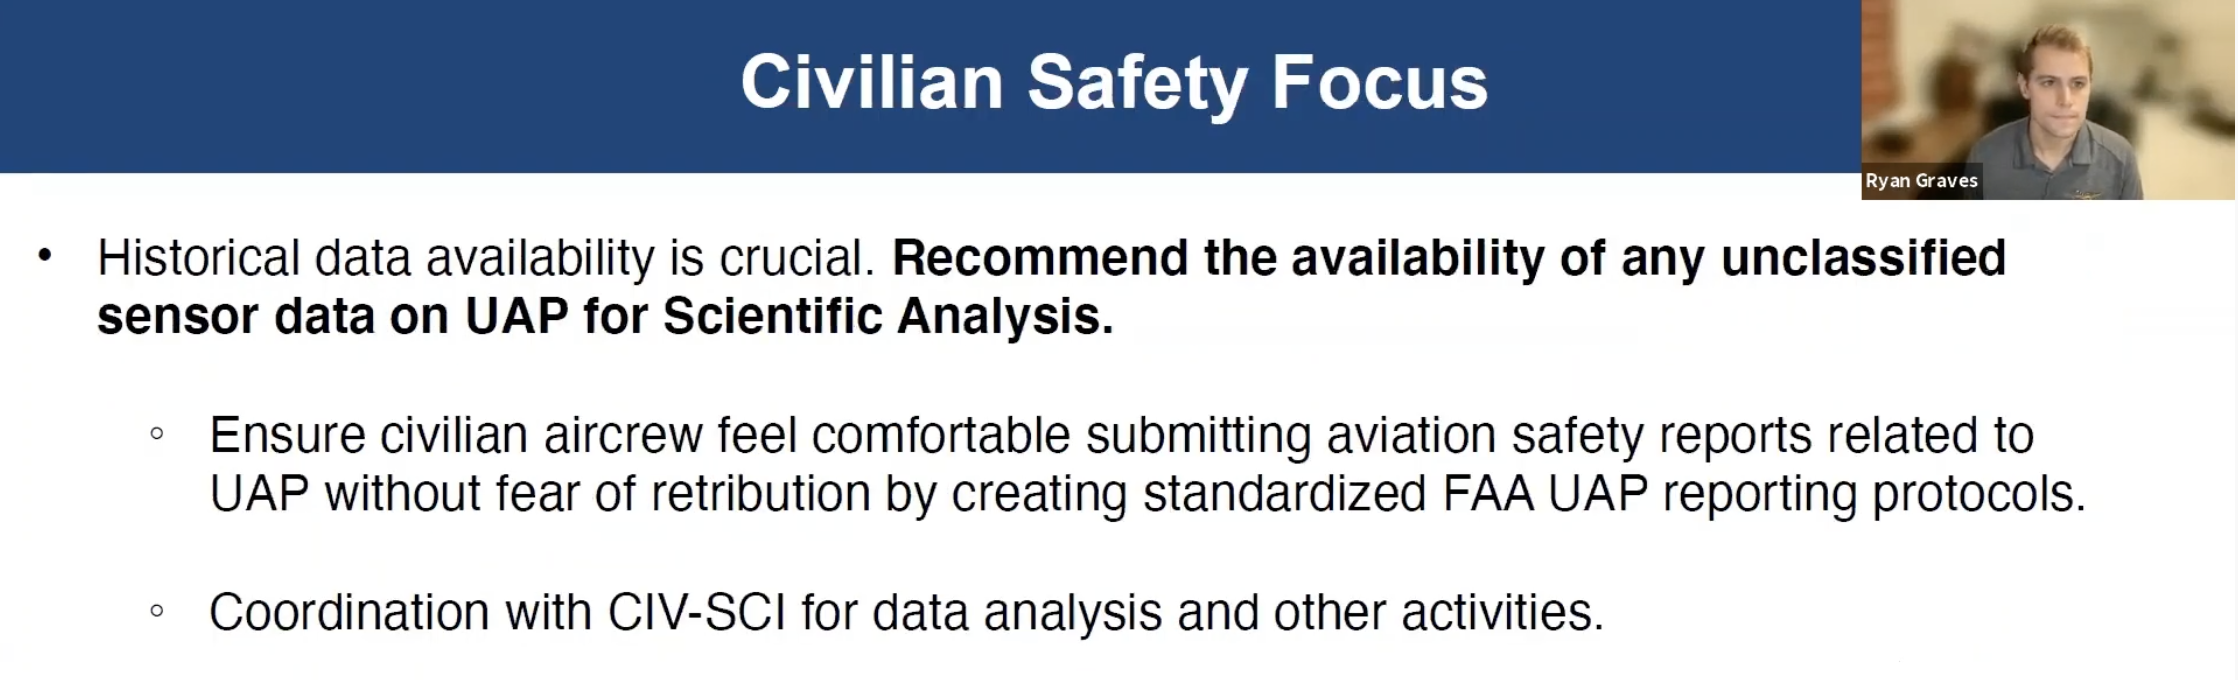 F-18 Pilot Graves & UAP Recommendations: “I Know For A Fact That This Is Still Happening” To Aviators “Every Single Flight They Go On”